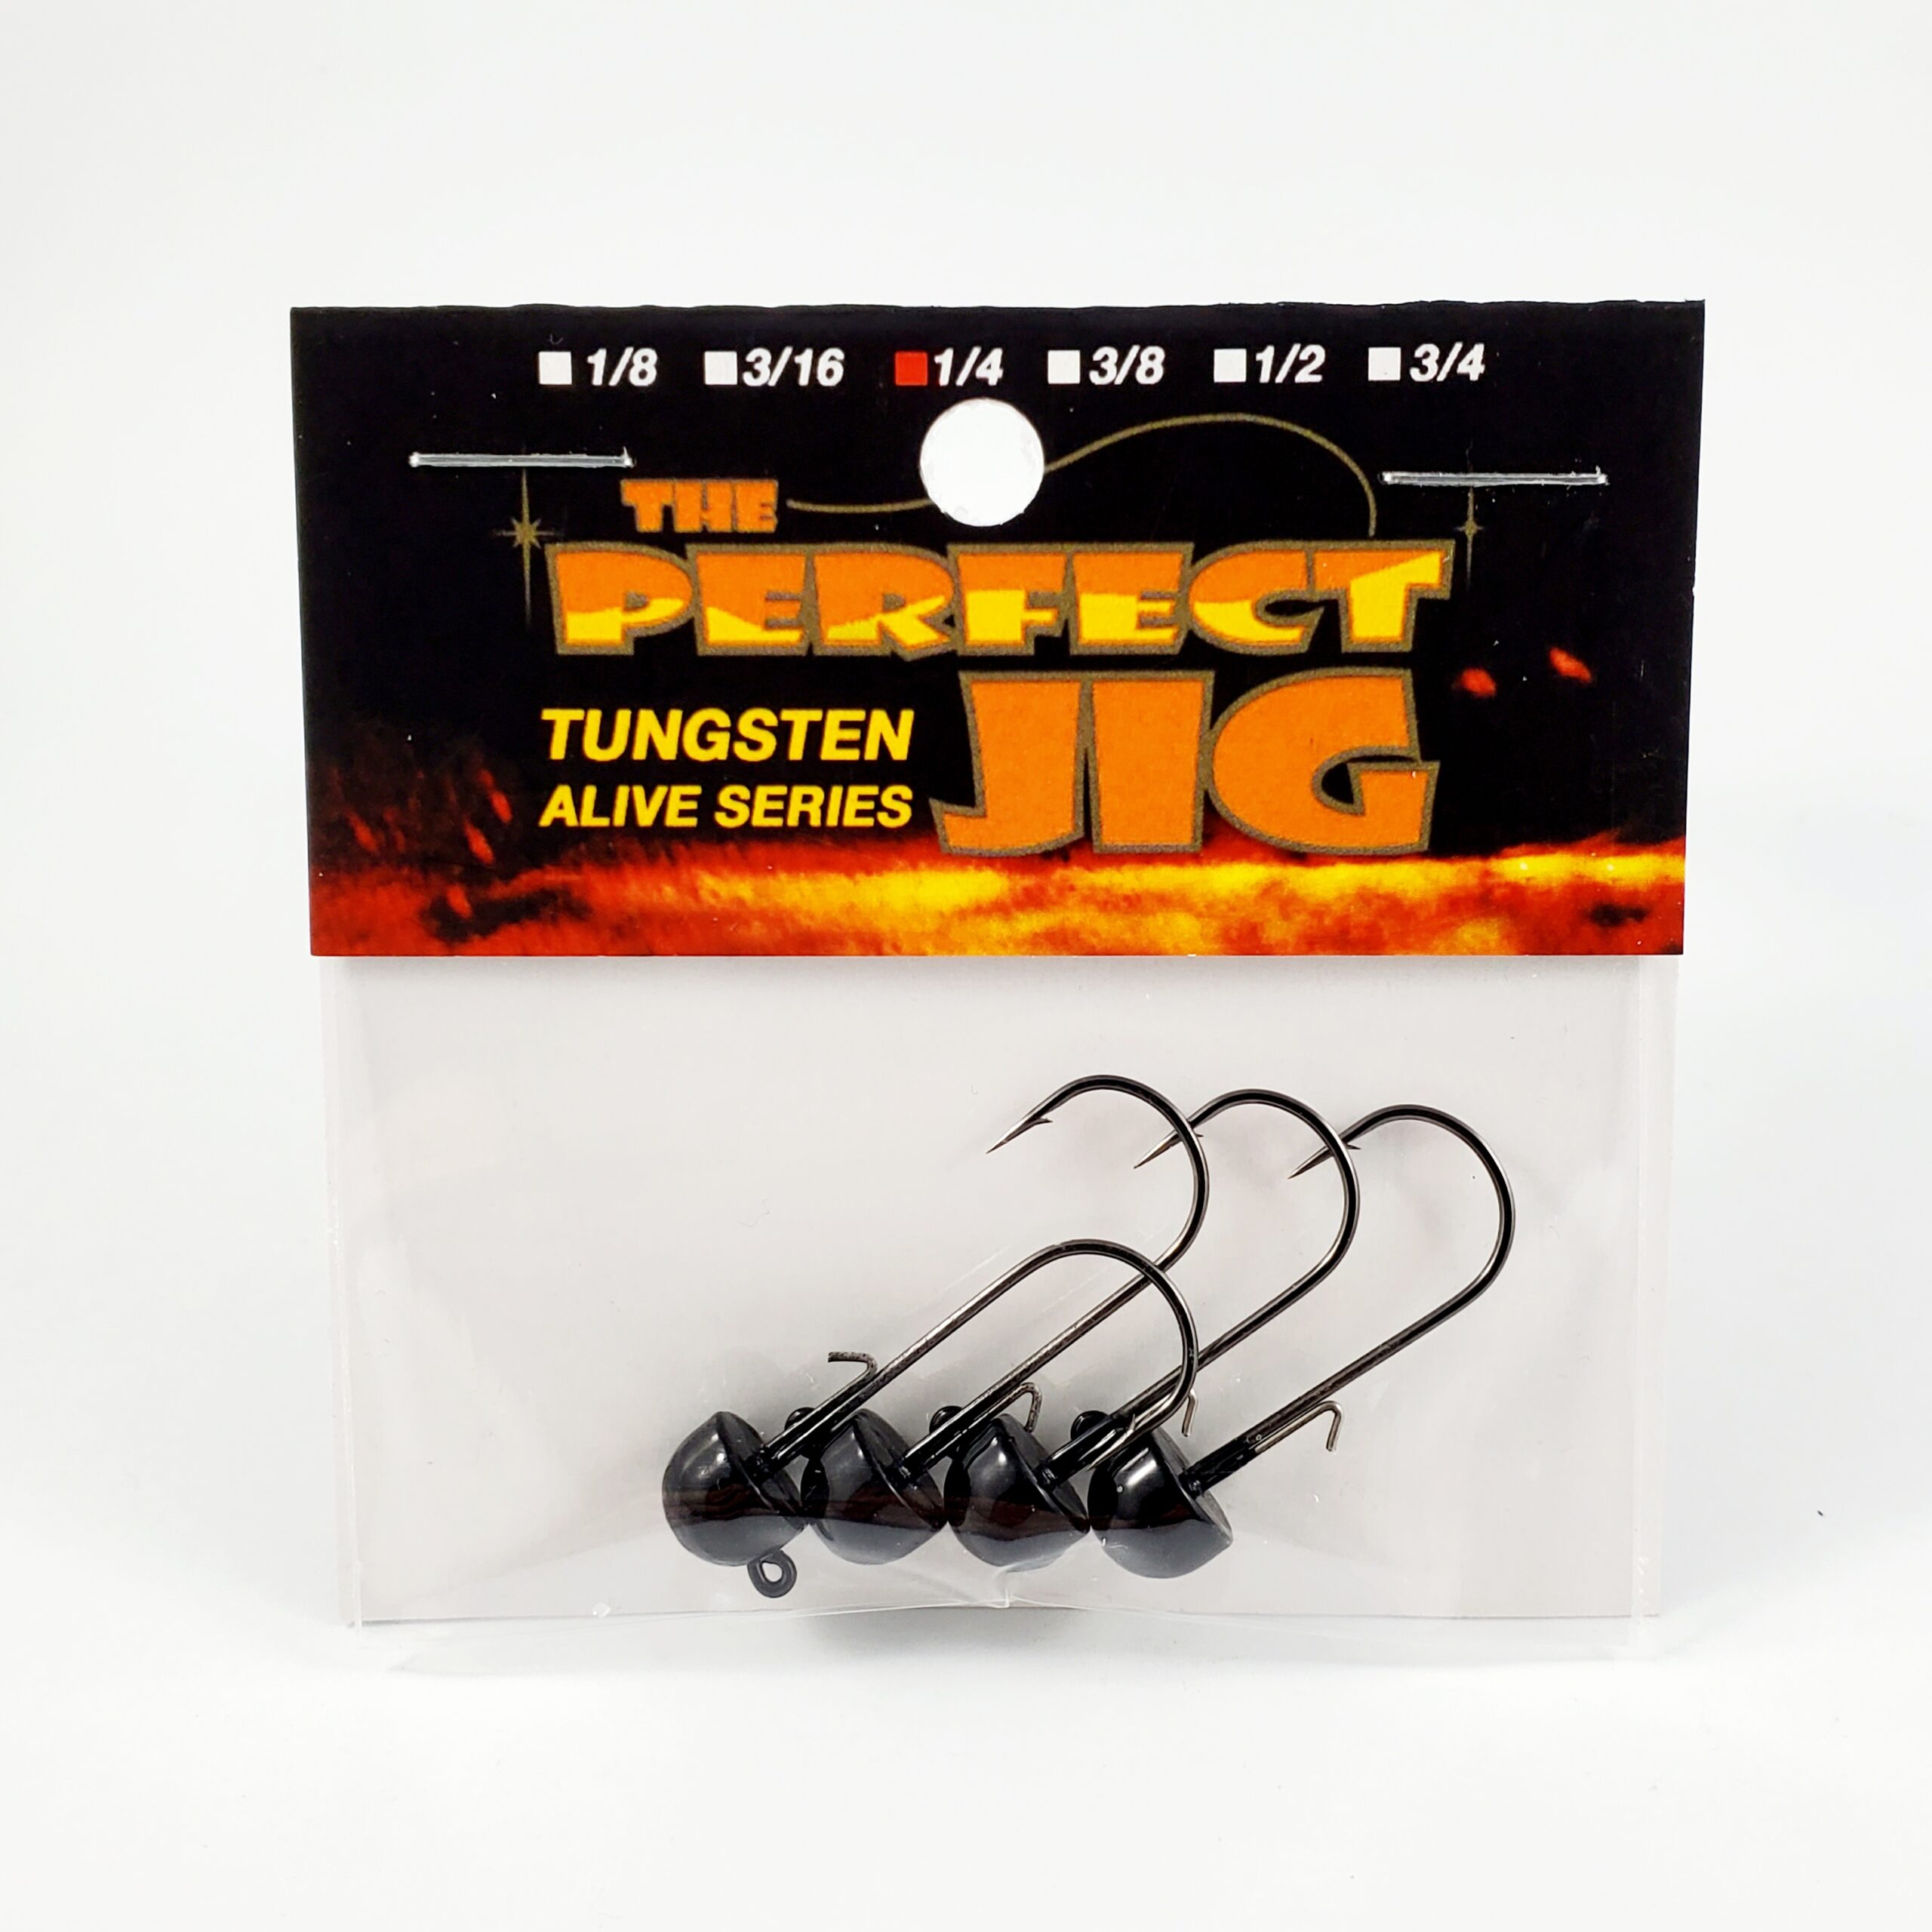 Tungsten Alive Ned Head - The Perfect Jig